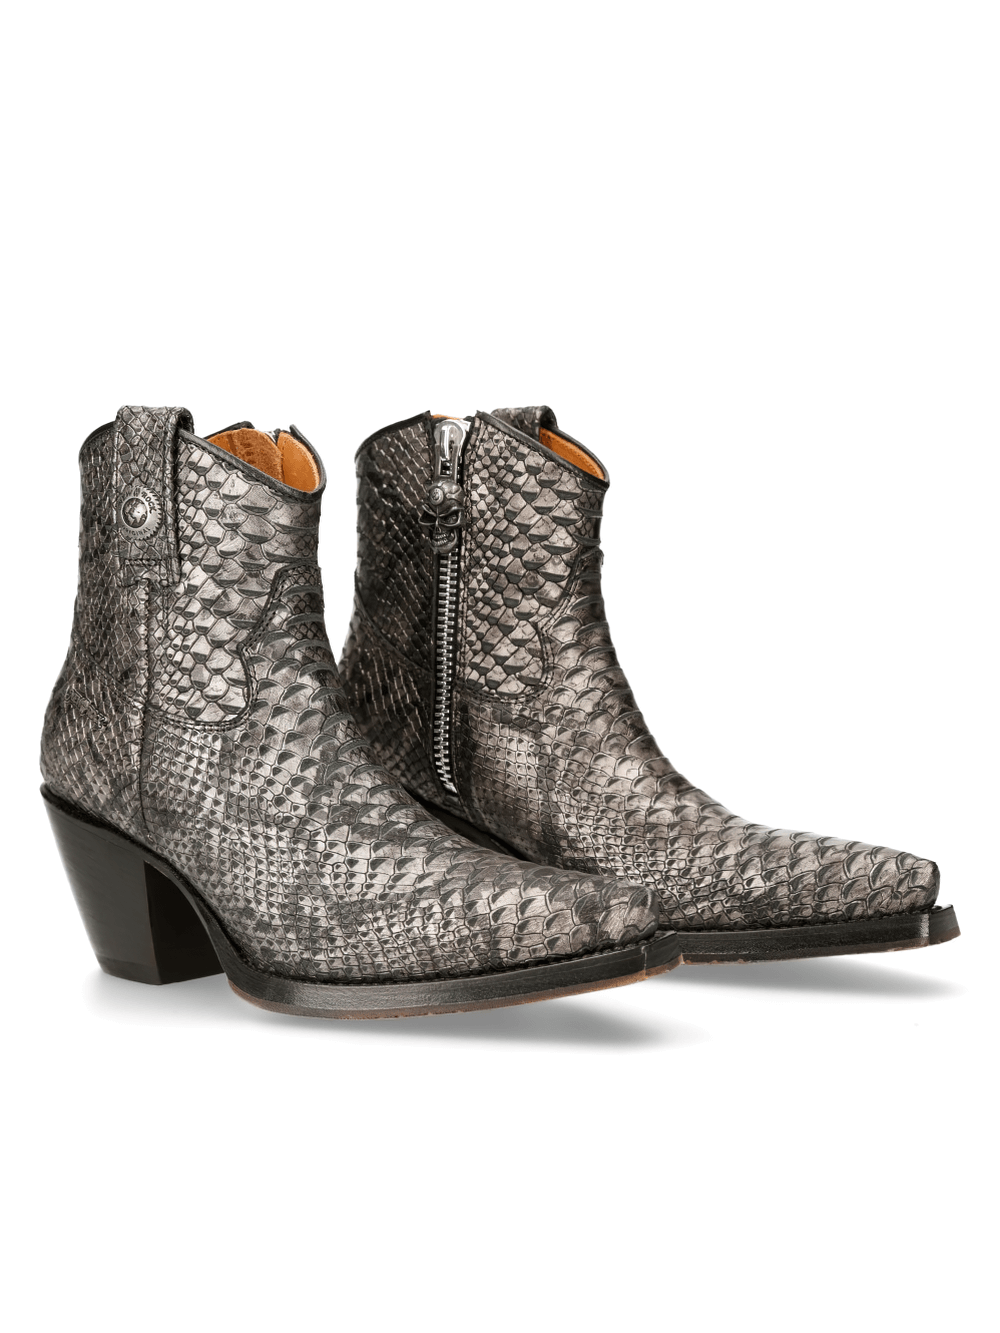 NEW ROCK Steel Snake Print Ankle Boots with Zipper